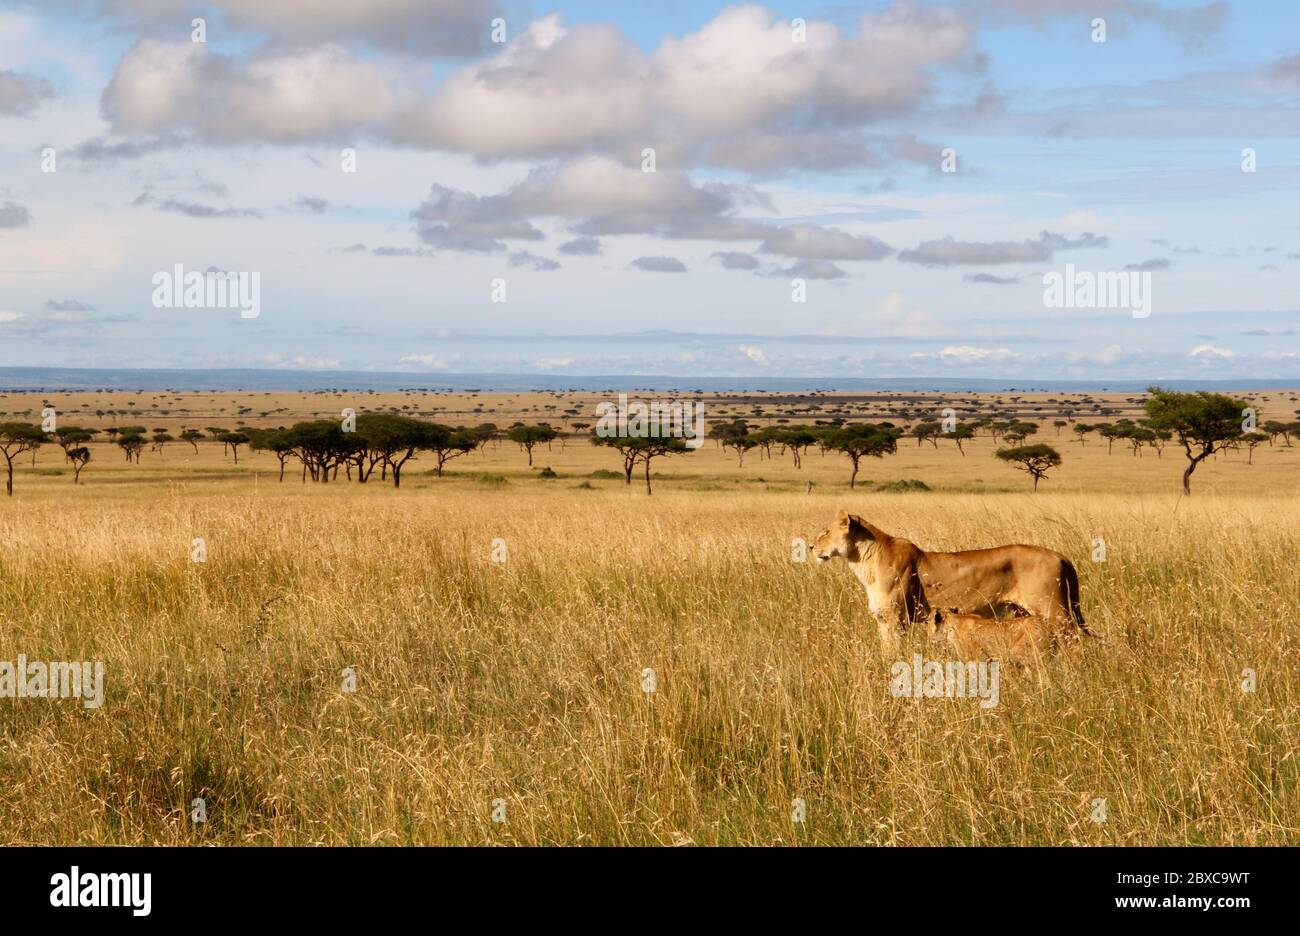 a lioness with her cub roam through the high dry grass of the savannah, they stand attentively in the golden morning light in the endless expanse Stock Photo